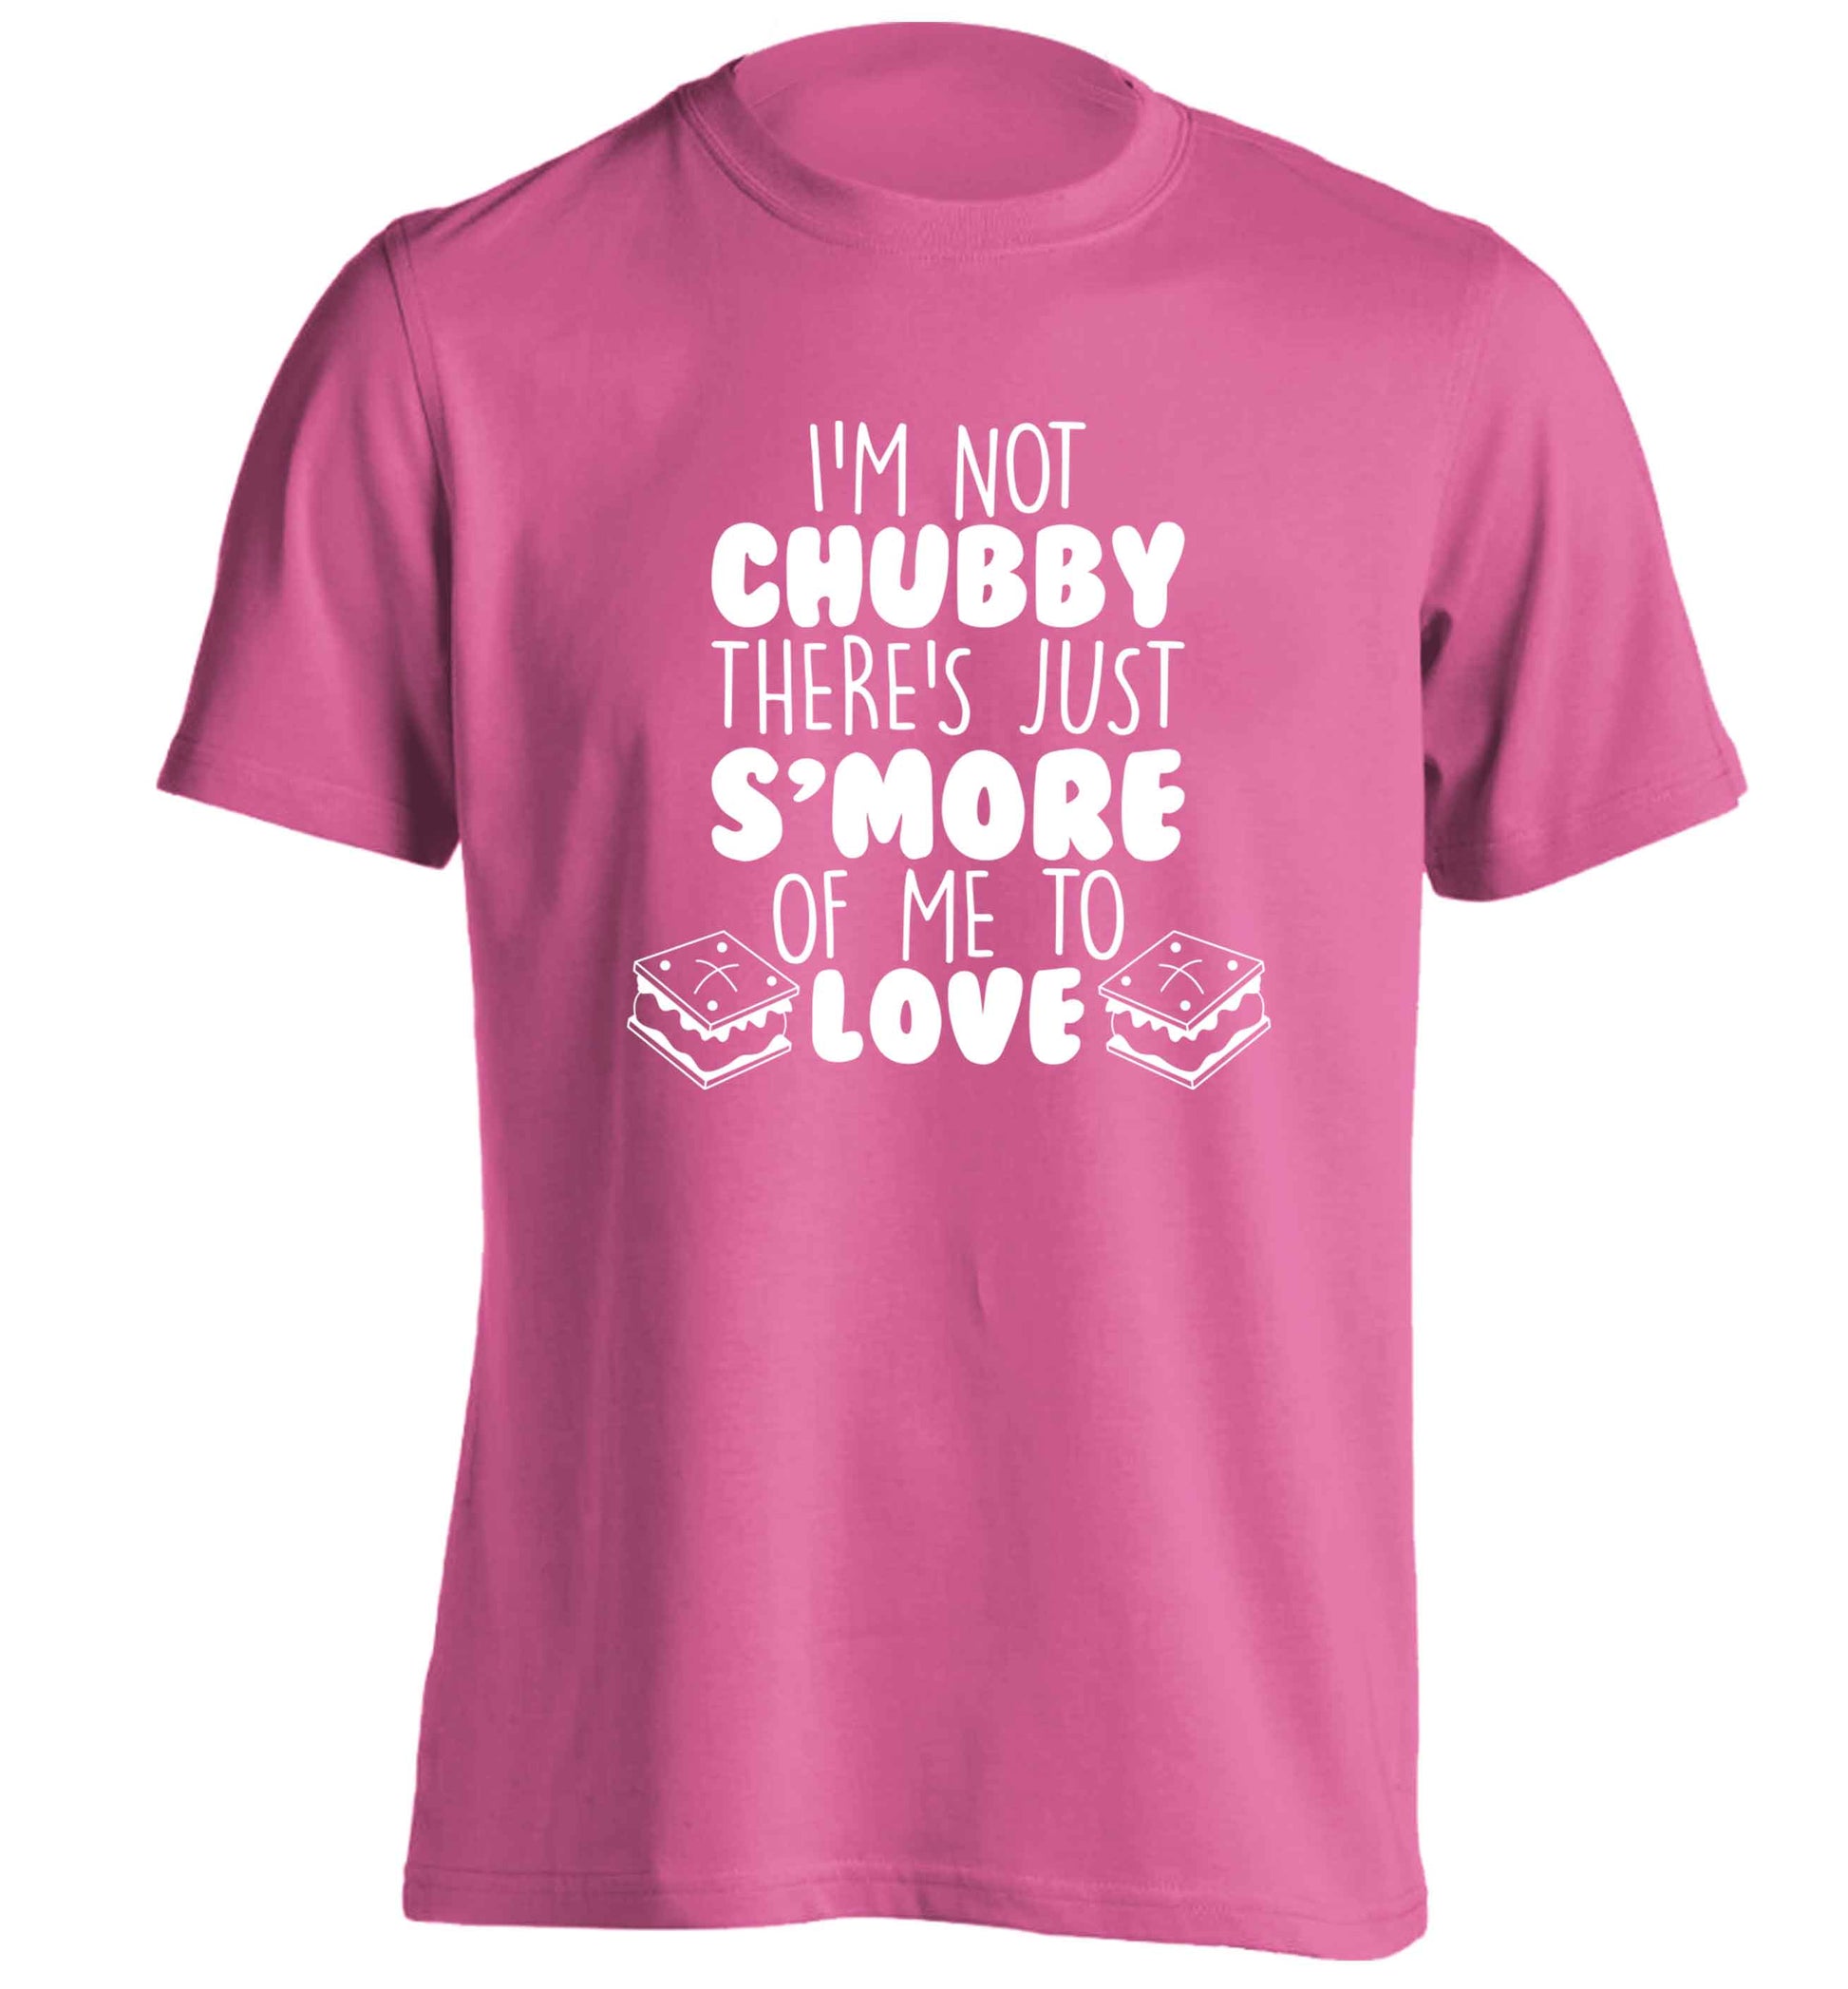 I'm not chubby there's just s'more of me to love adults unisex pink Tshirt 2XL